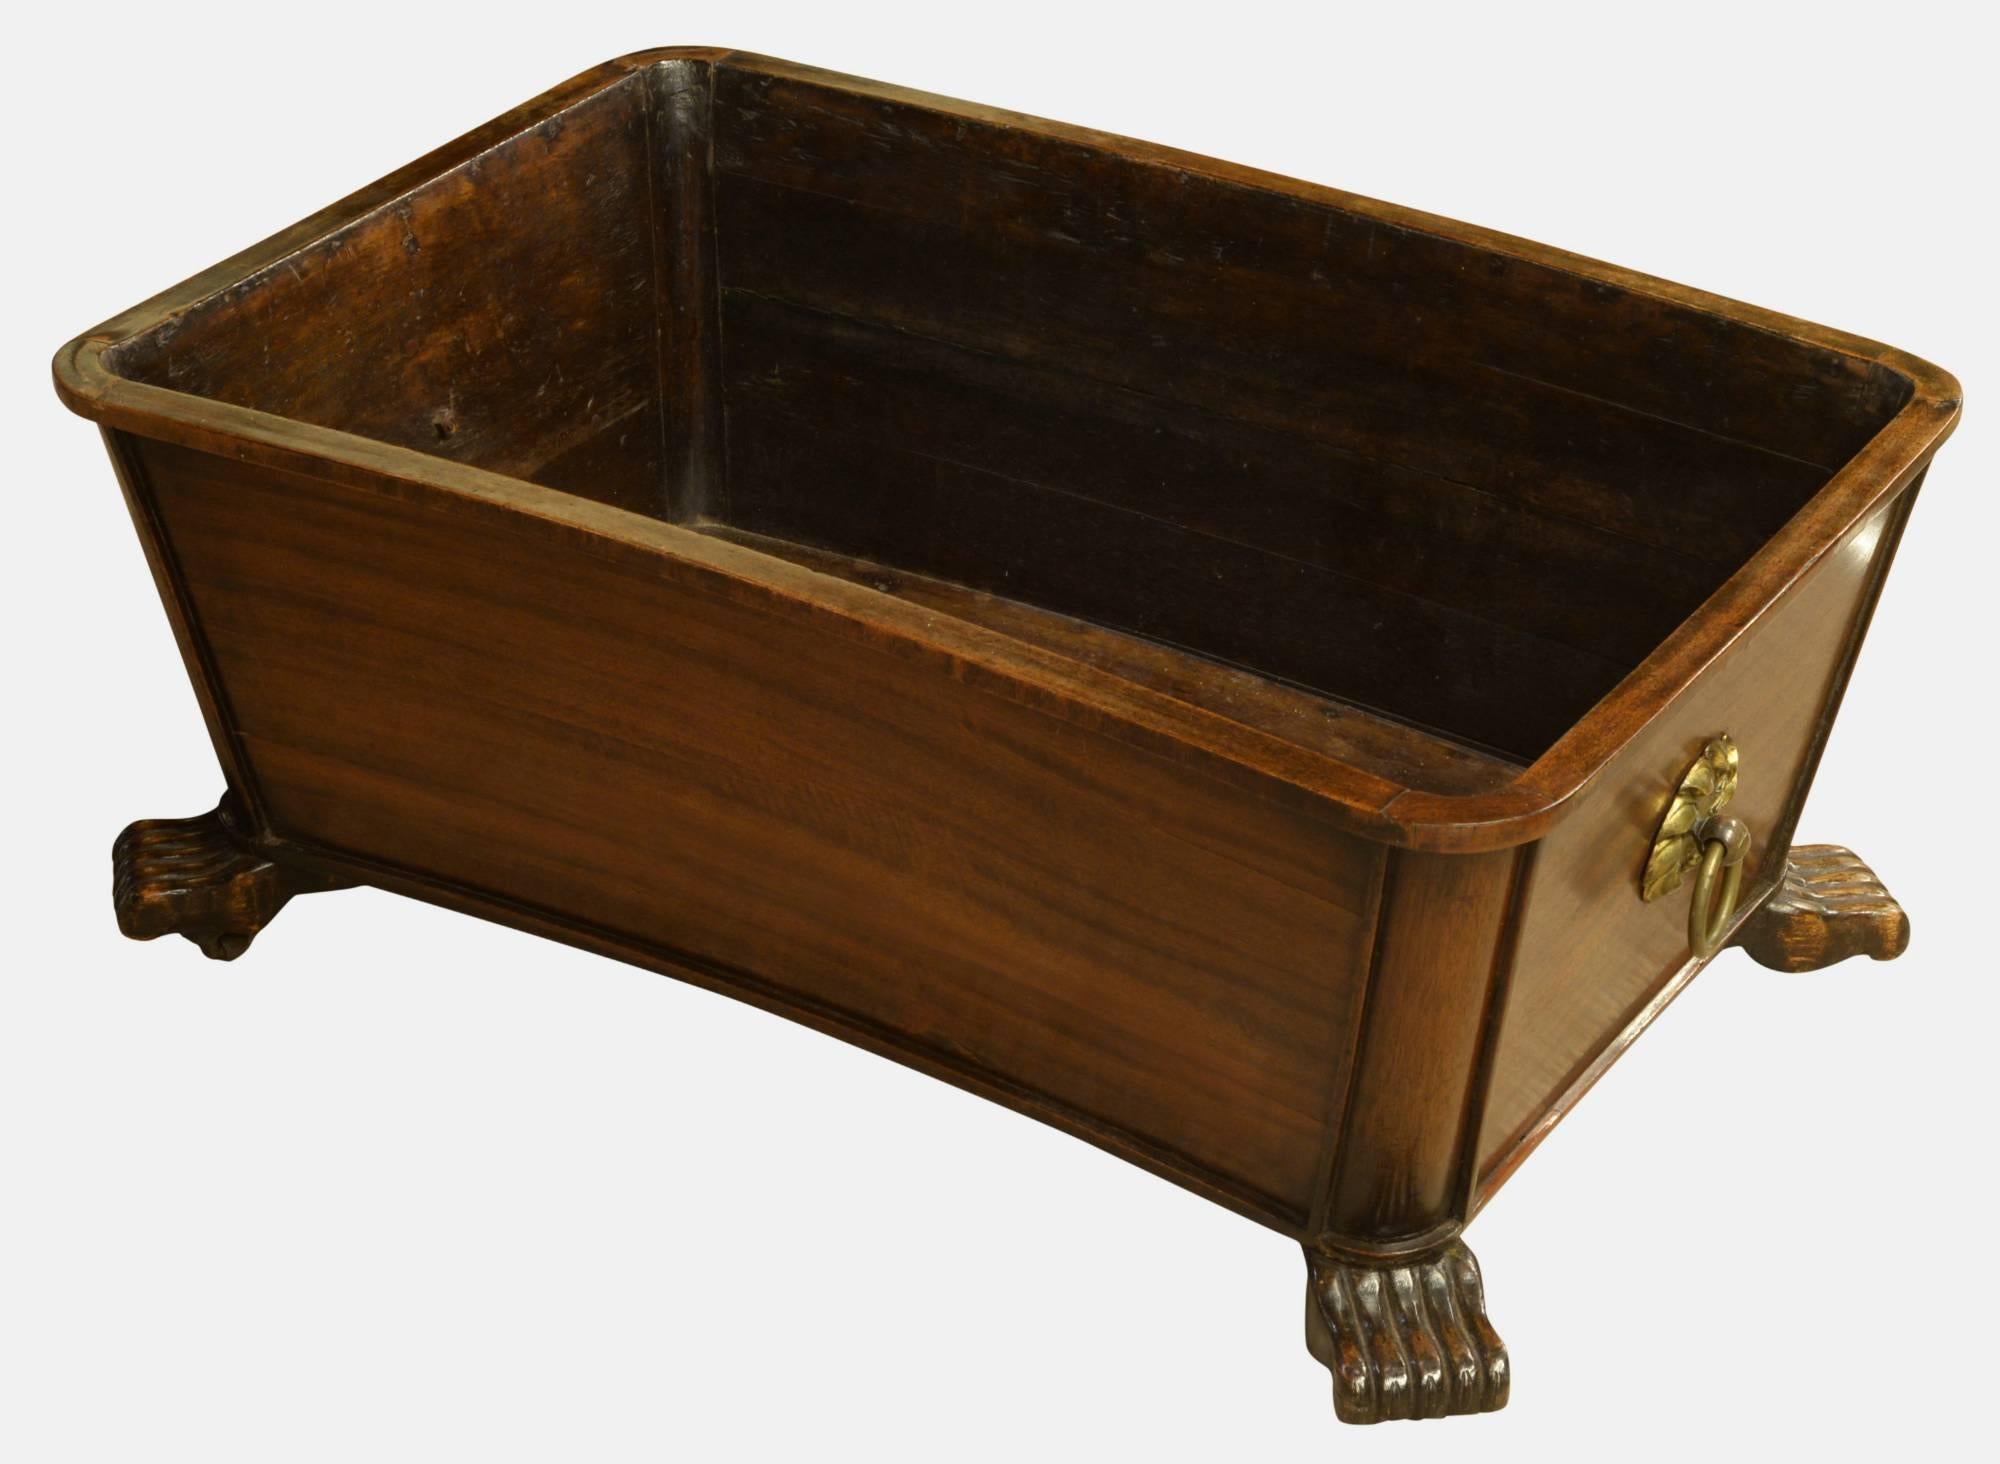 A George IV mahogany wine cooler with unusual paw feet.